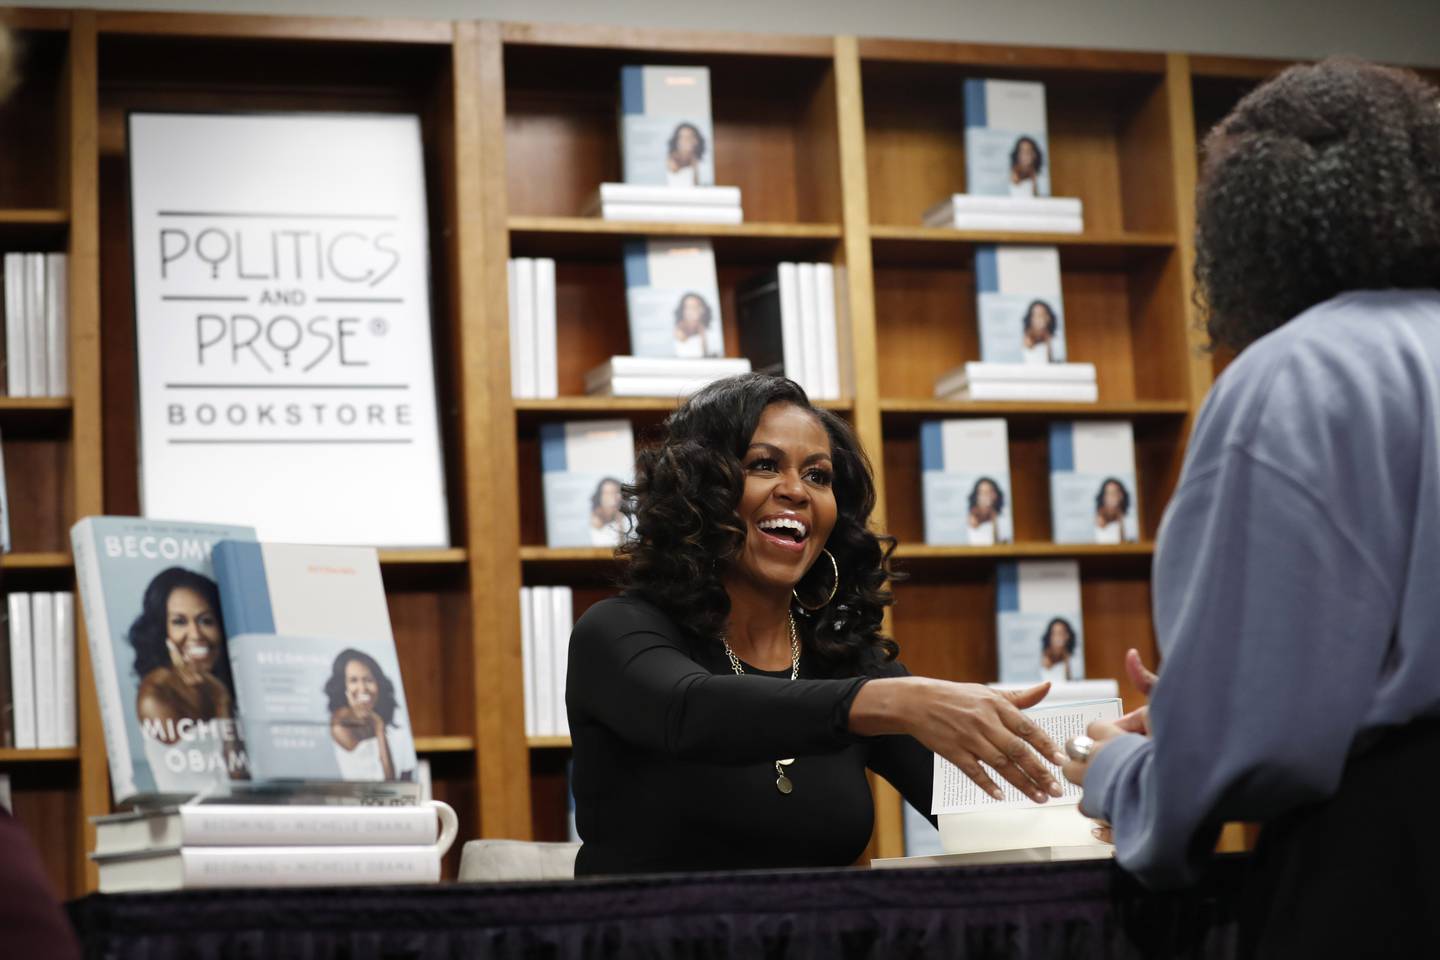 Former first lady Michelle Obama greets people as they buy signed copies of her book, "Becoming," Monday Nov. 18, 2019, at Politics and Prose Bookstore in Washington. (AP Photo/Jacquelyn Martin)